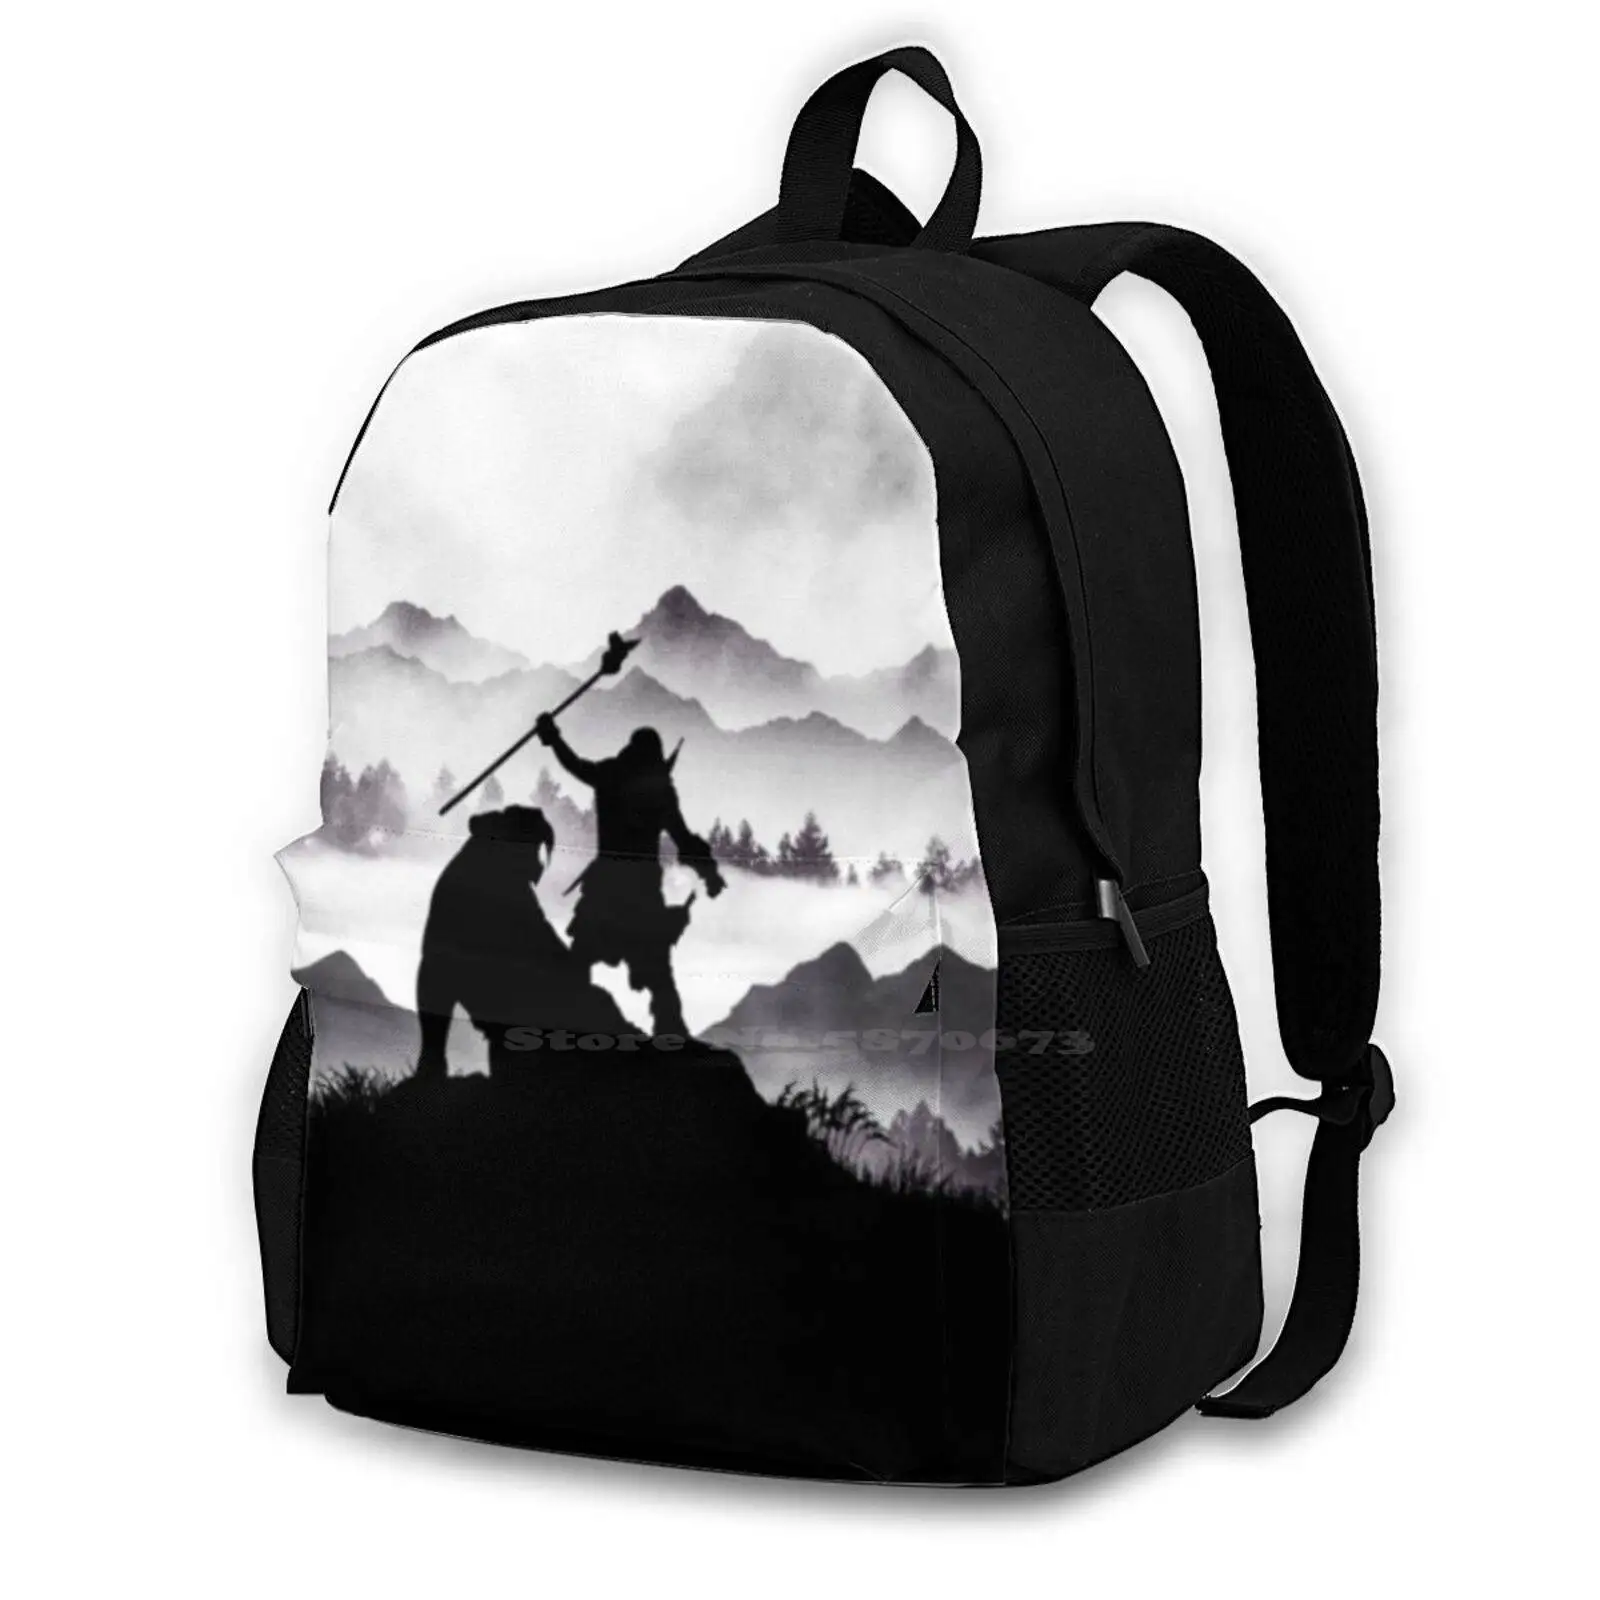 

Far Cry Primal Large Capacity Fashion Backpack Laptop Travel Bags Far Cry Far Cry 5 Video Game Video Games Farcry 5 Fc5 Game